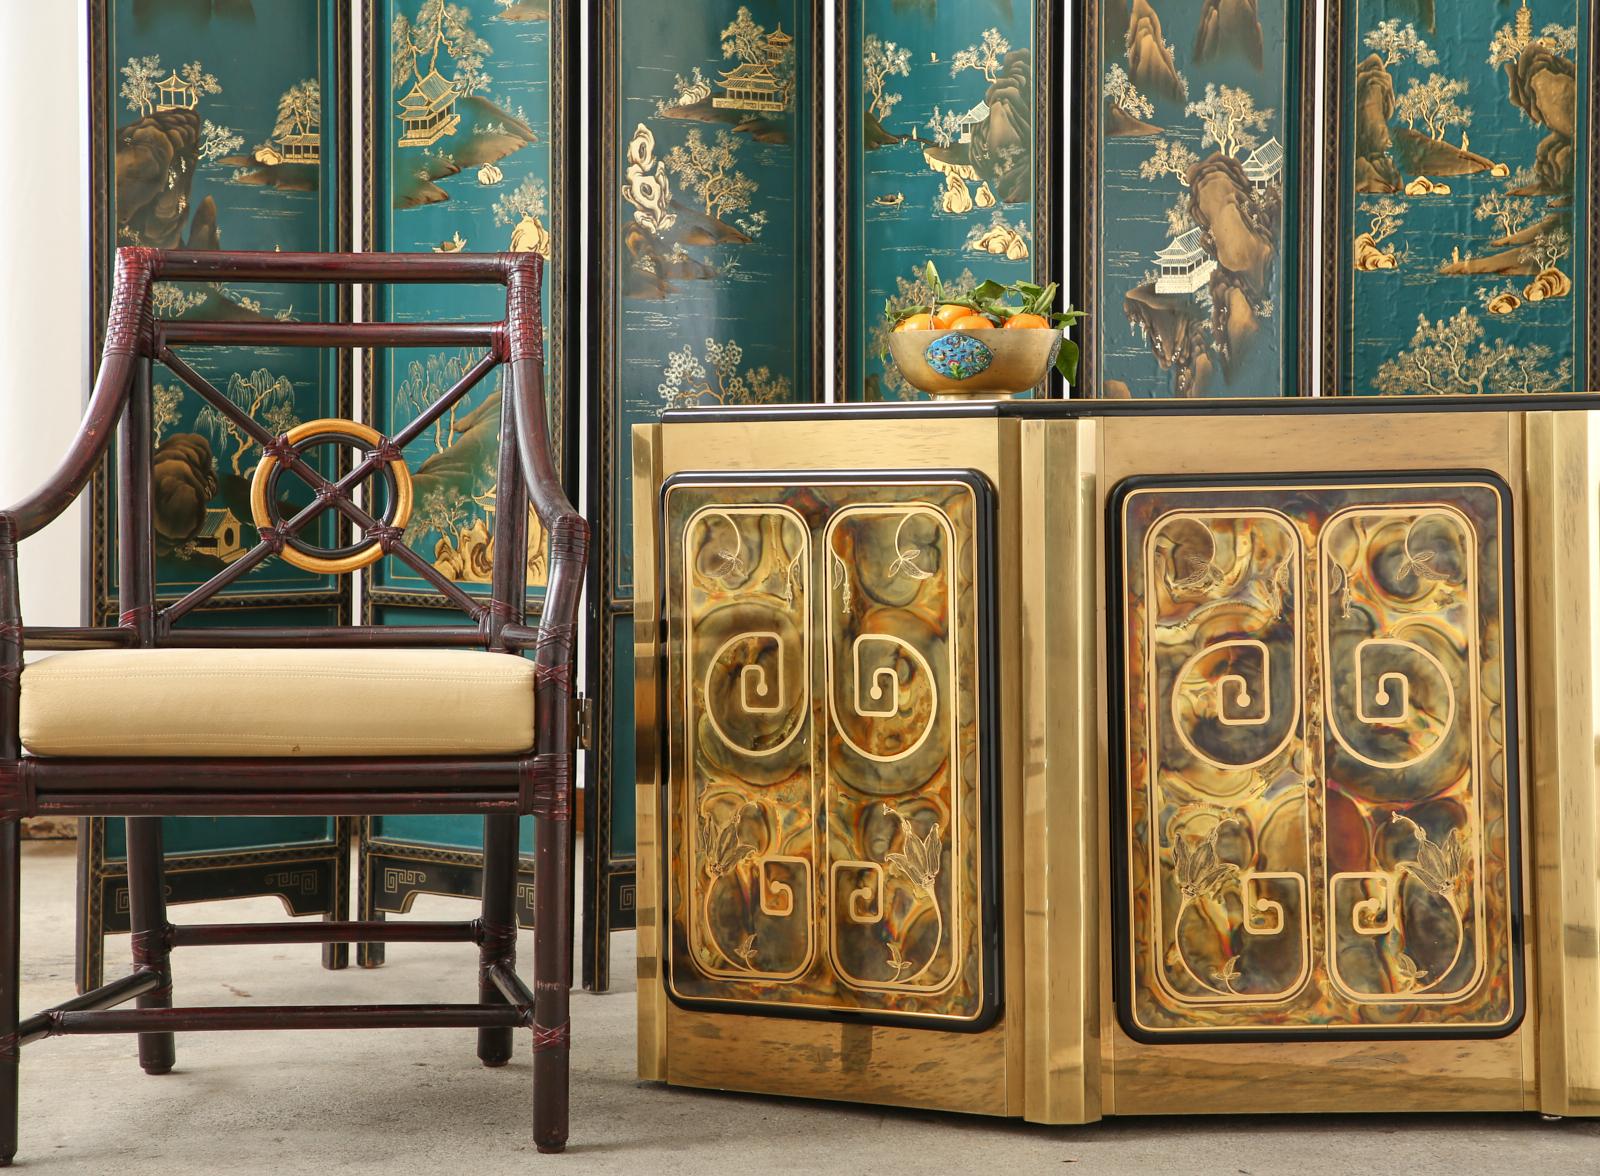 Stunning brass cabinet or credenza designed by Bernhard Rohne for Mastercraft. The cabinet features three panels and a top that have been acid etched. The panels are decorated with a Greek key design accented by flowers, and the top has a dramatic